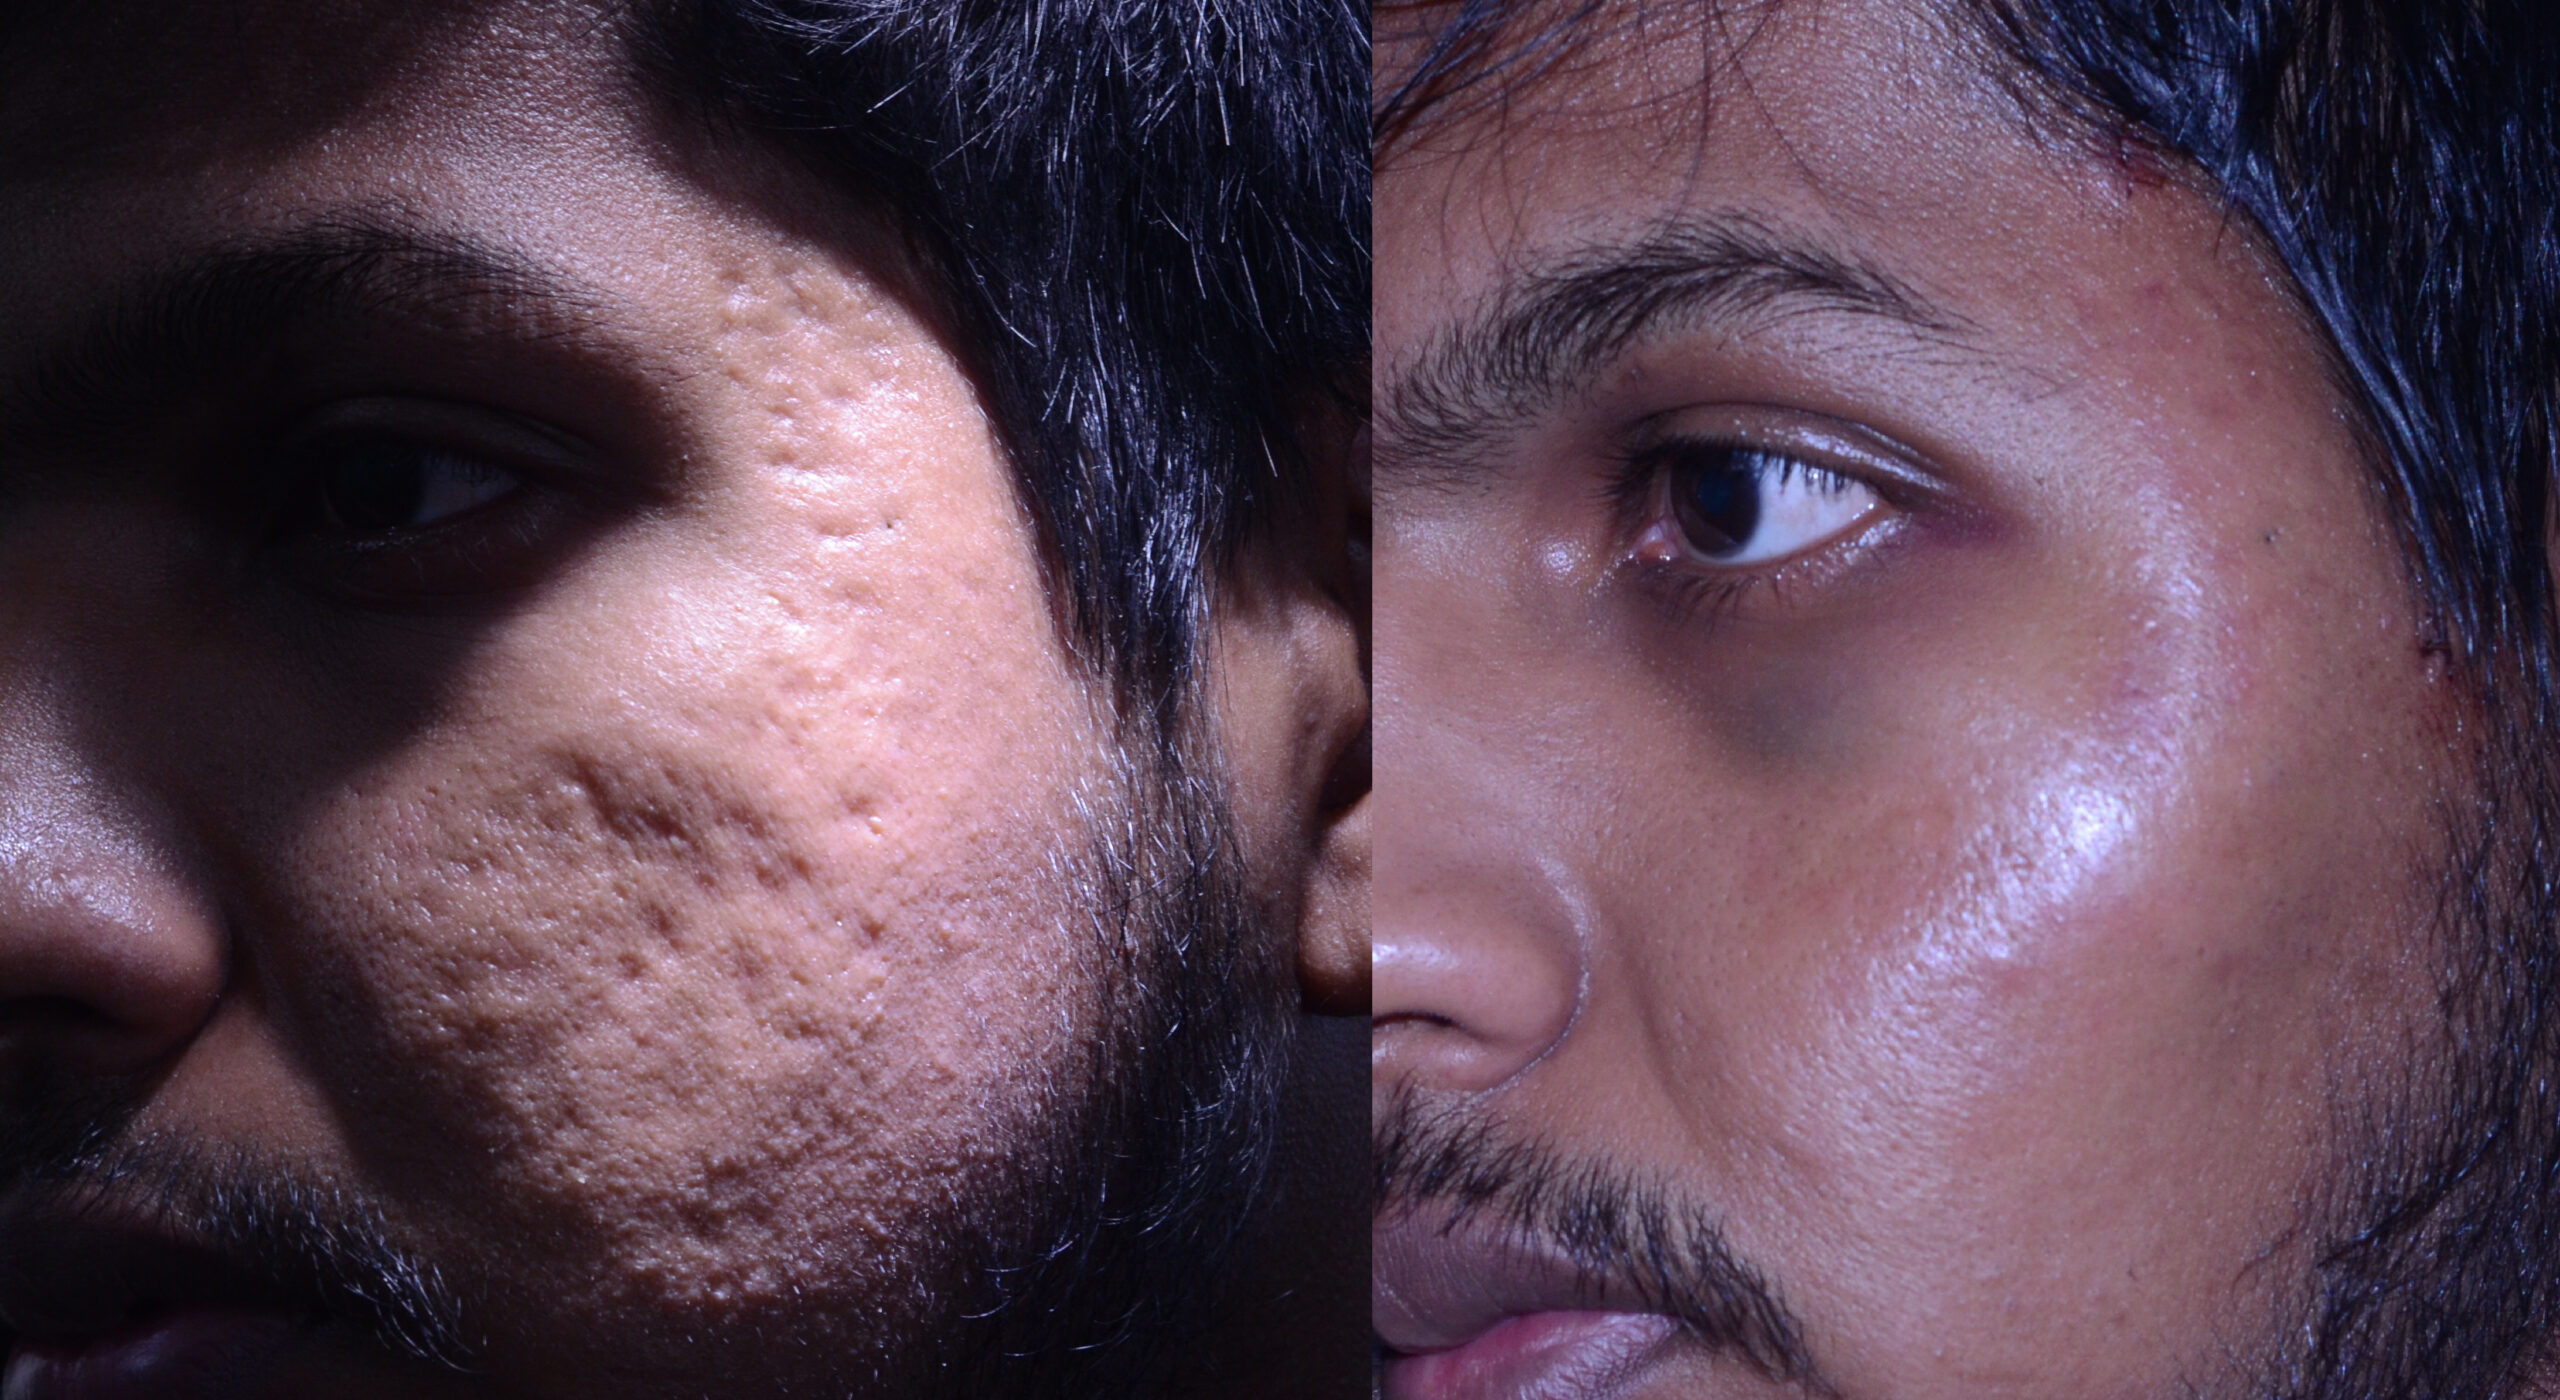 Acne scar treatment of temples and cheeks